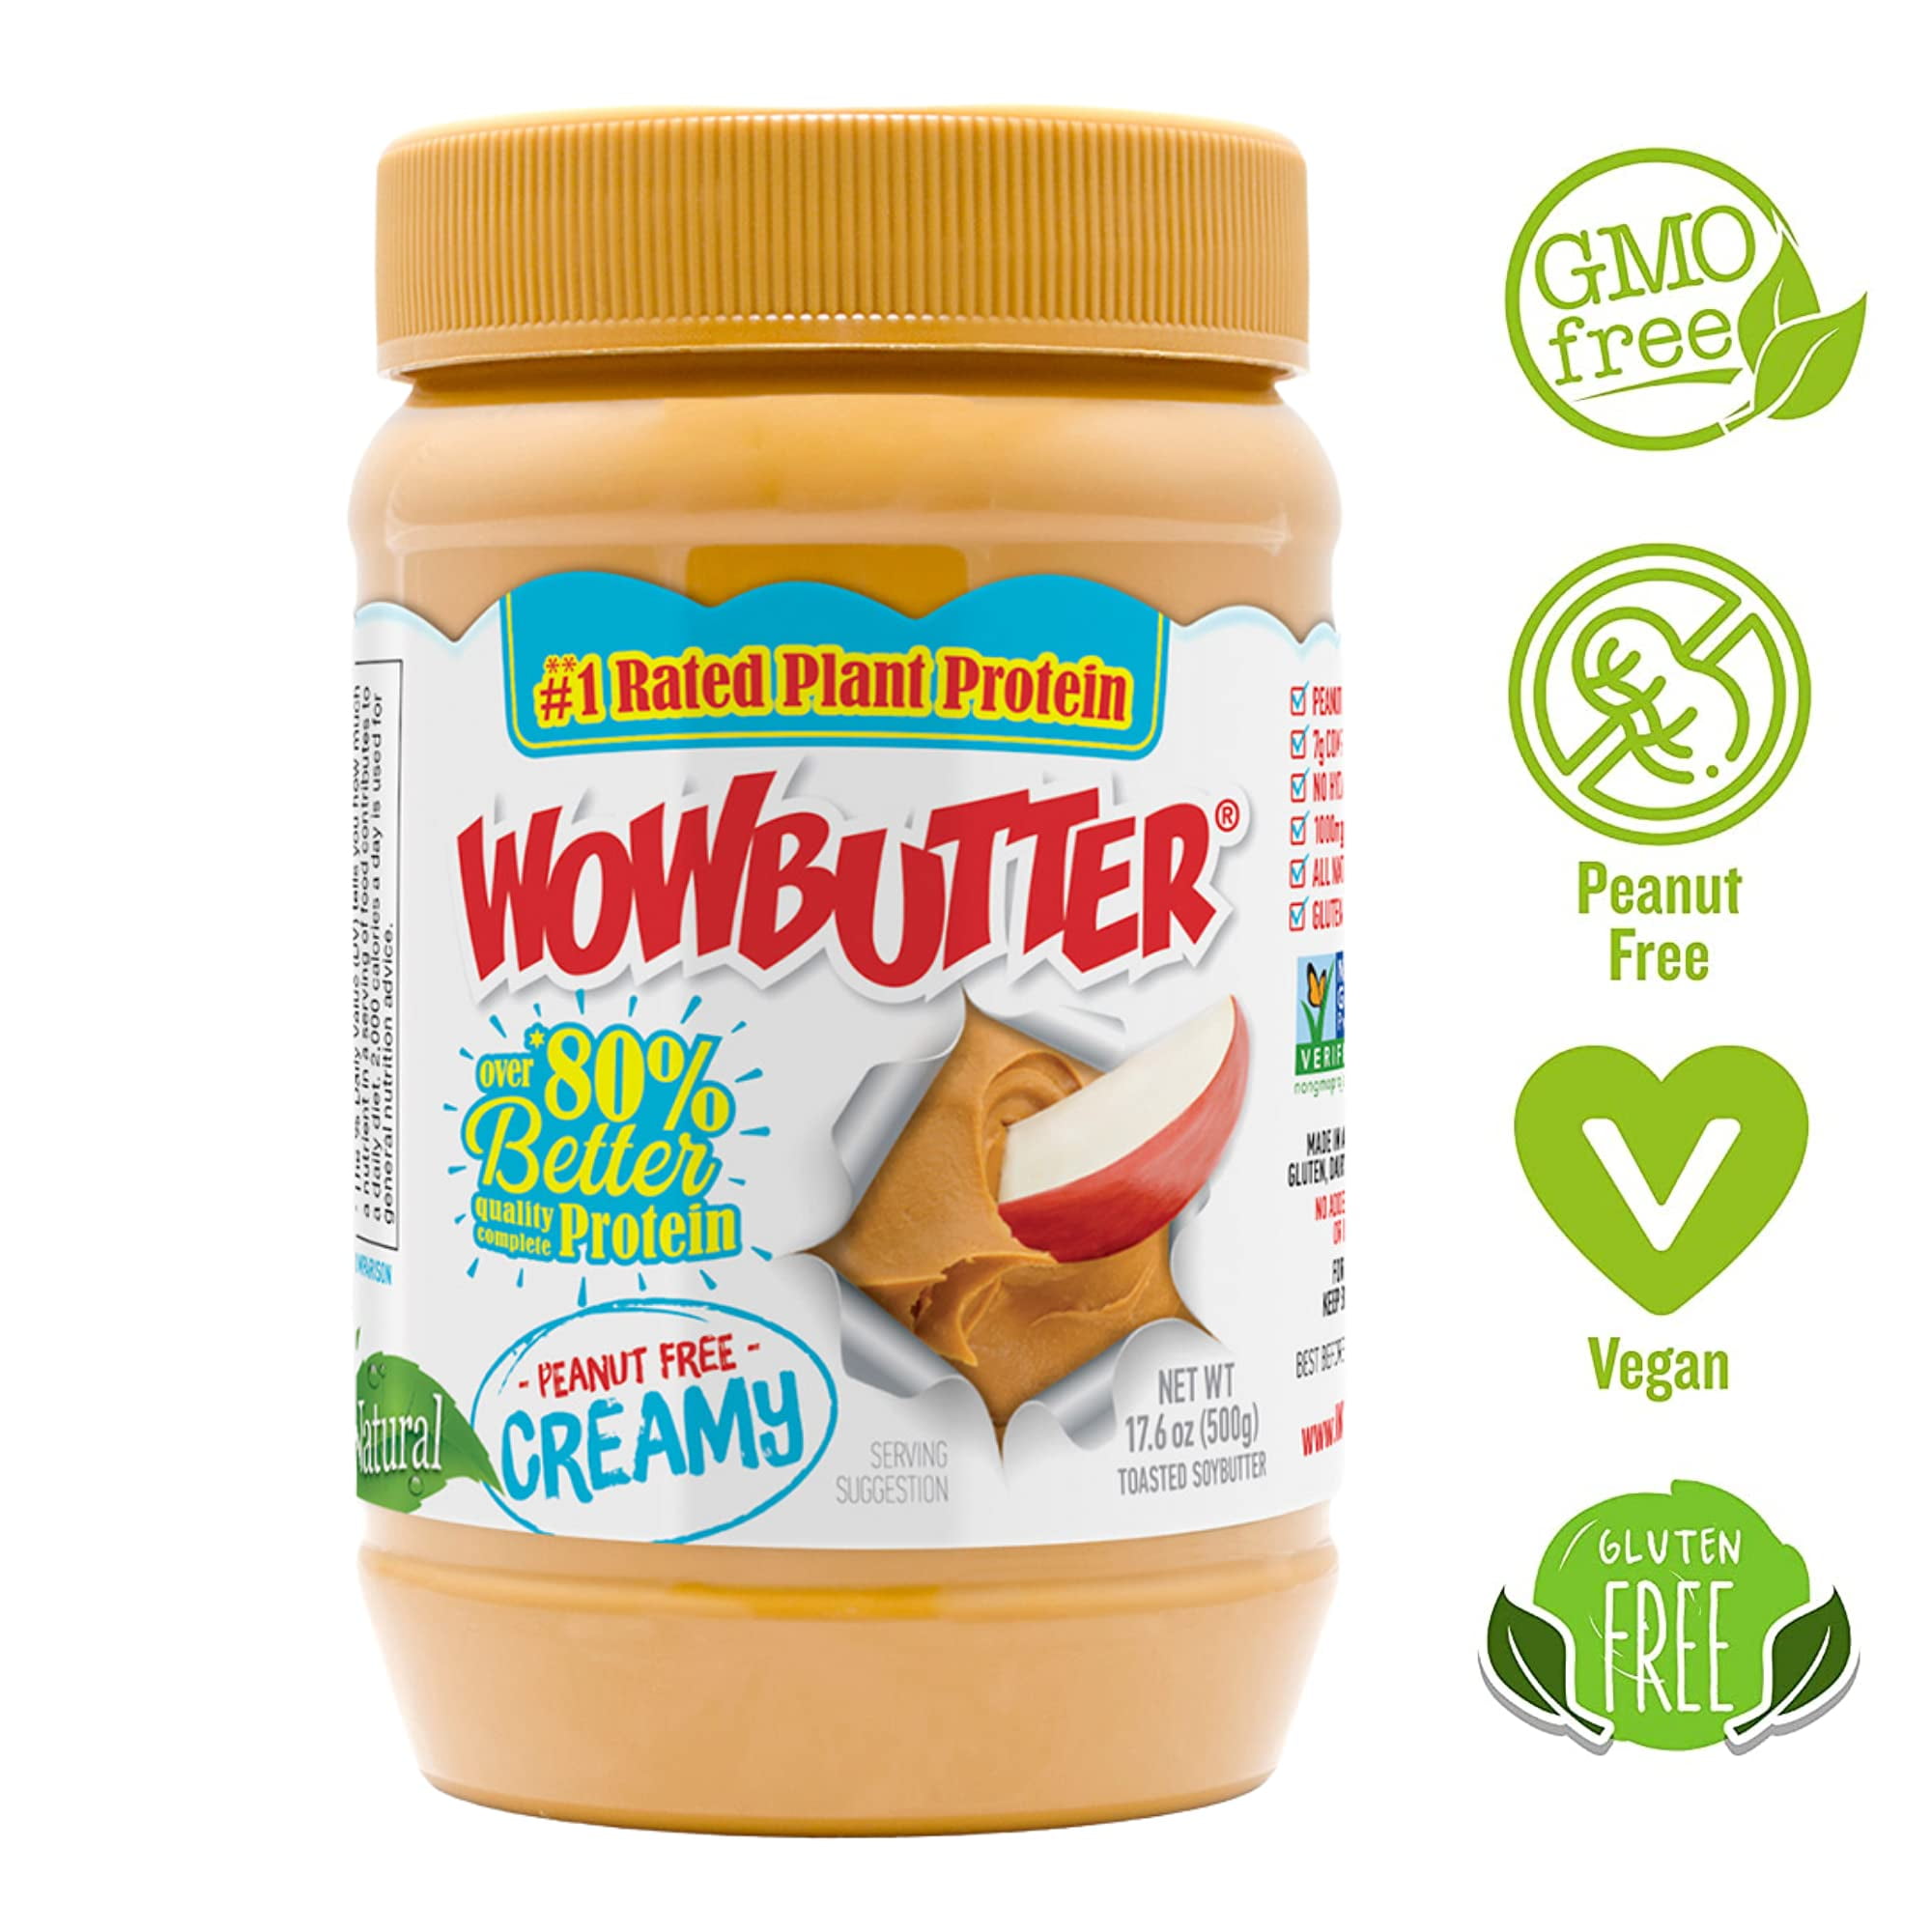 Buy Vega Nut Butter Shake Peanut butter with same day delivery at MarchesTAU